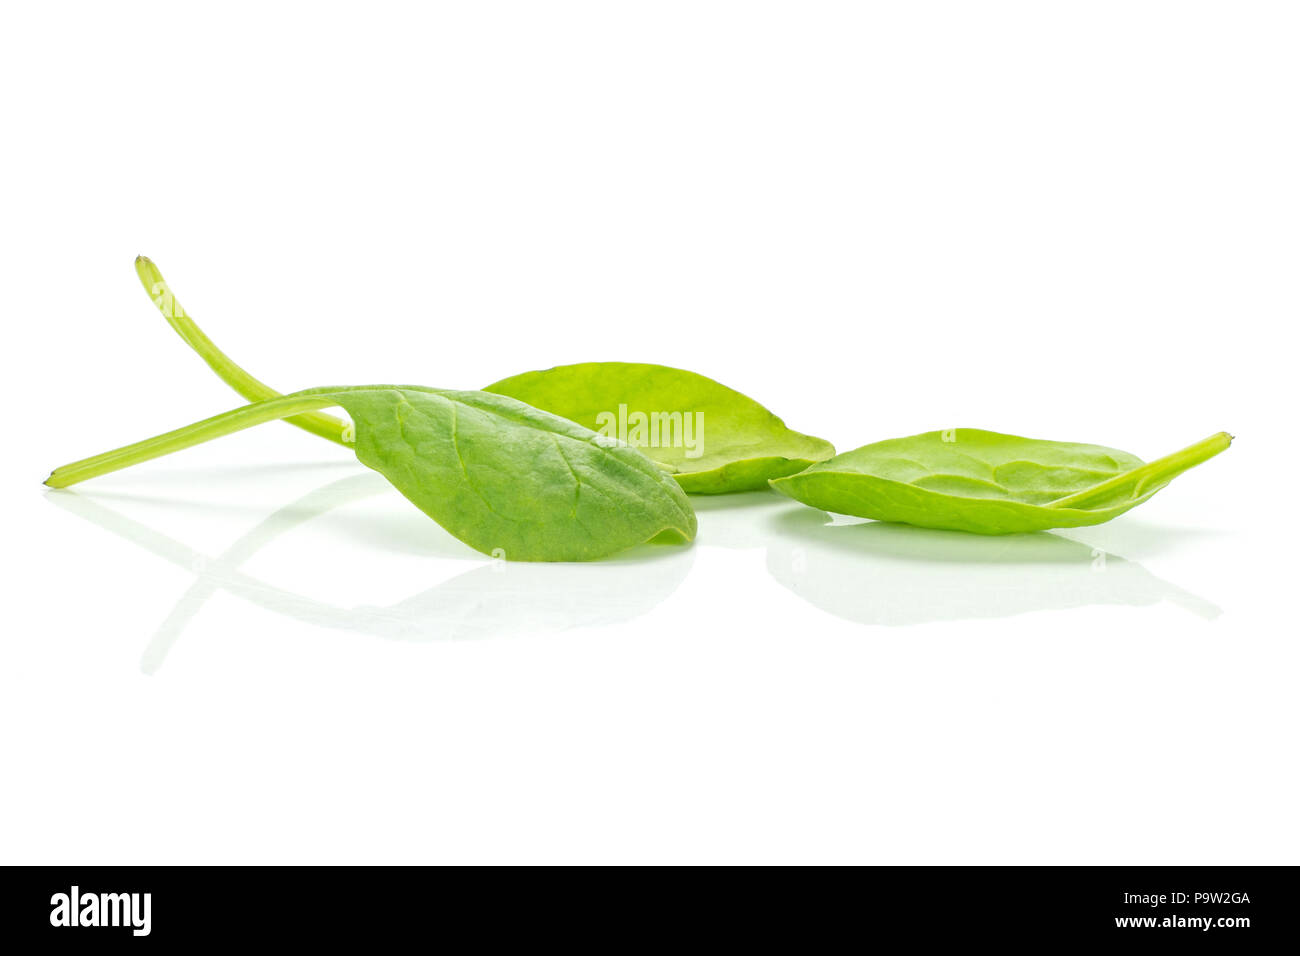 Fresh baby spinach isolated on white background group of three green single leaves Stock Photo